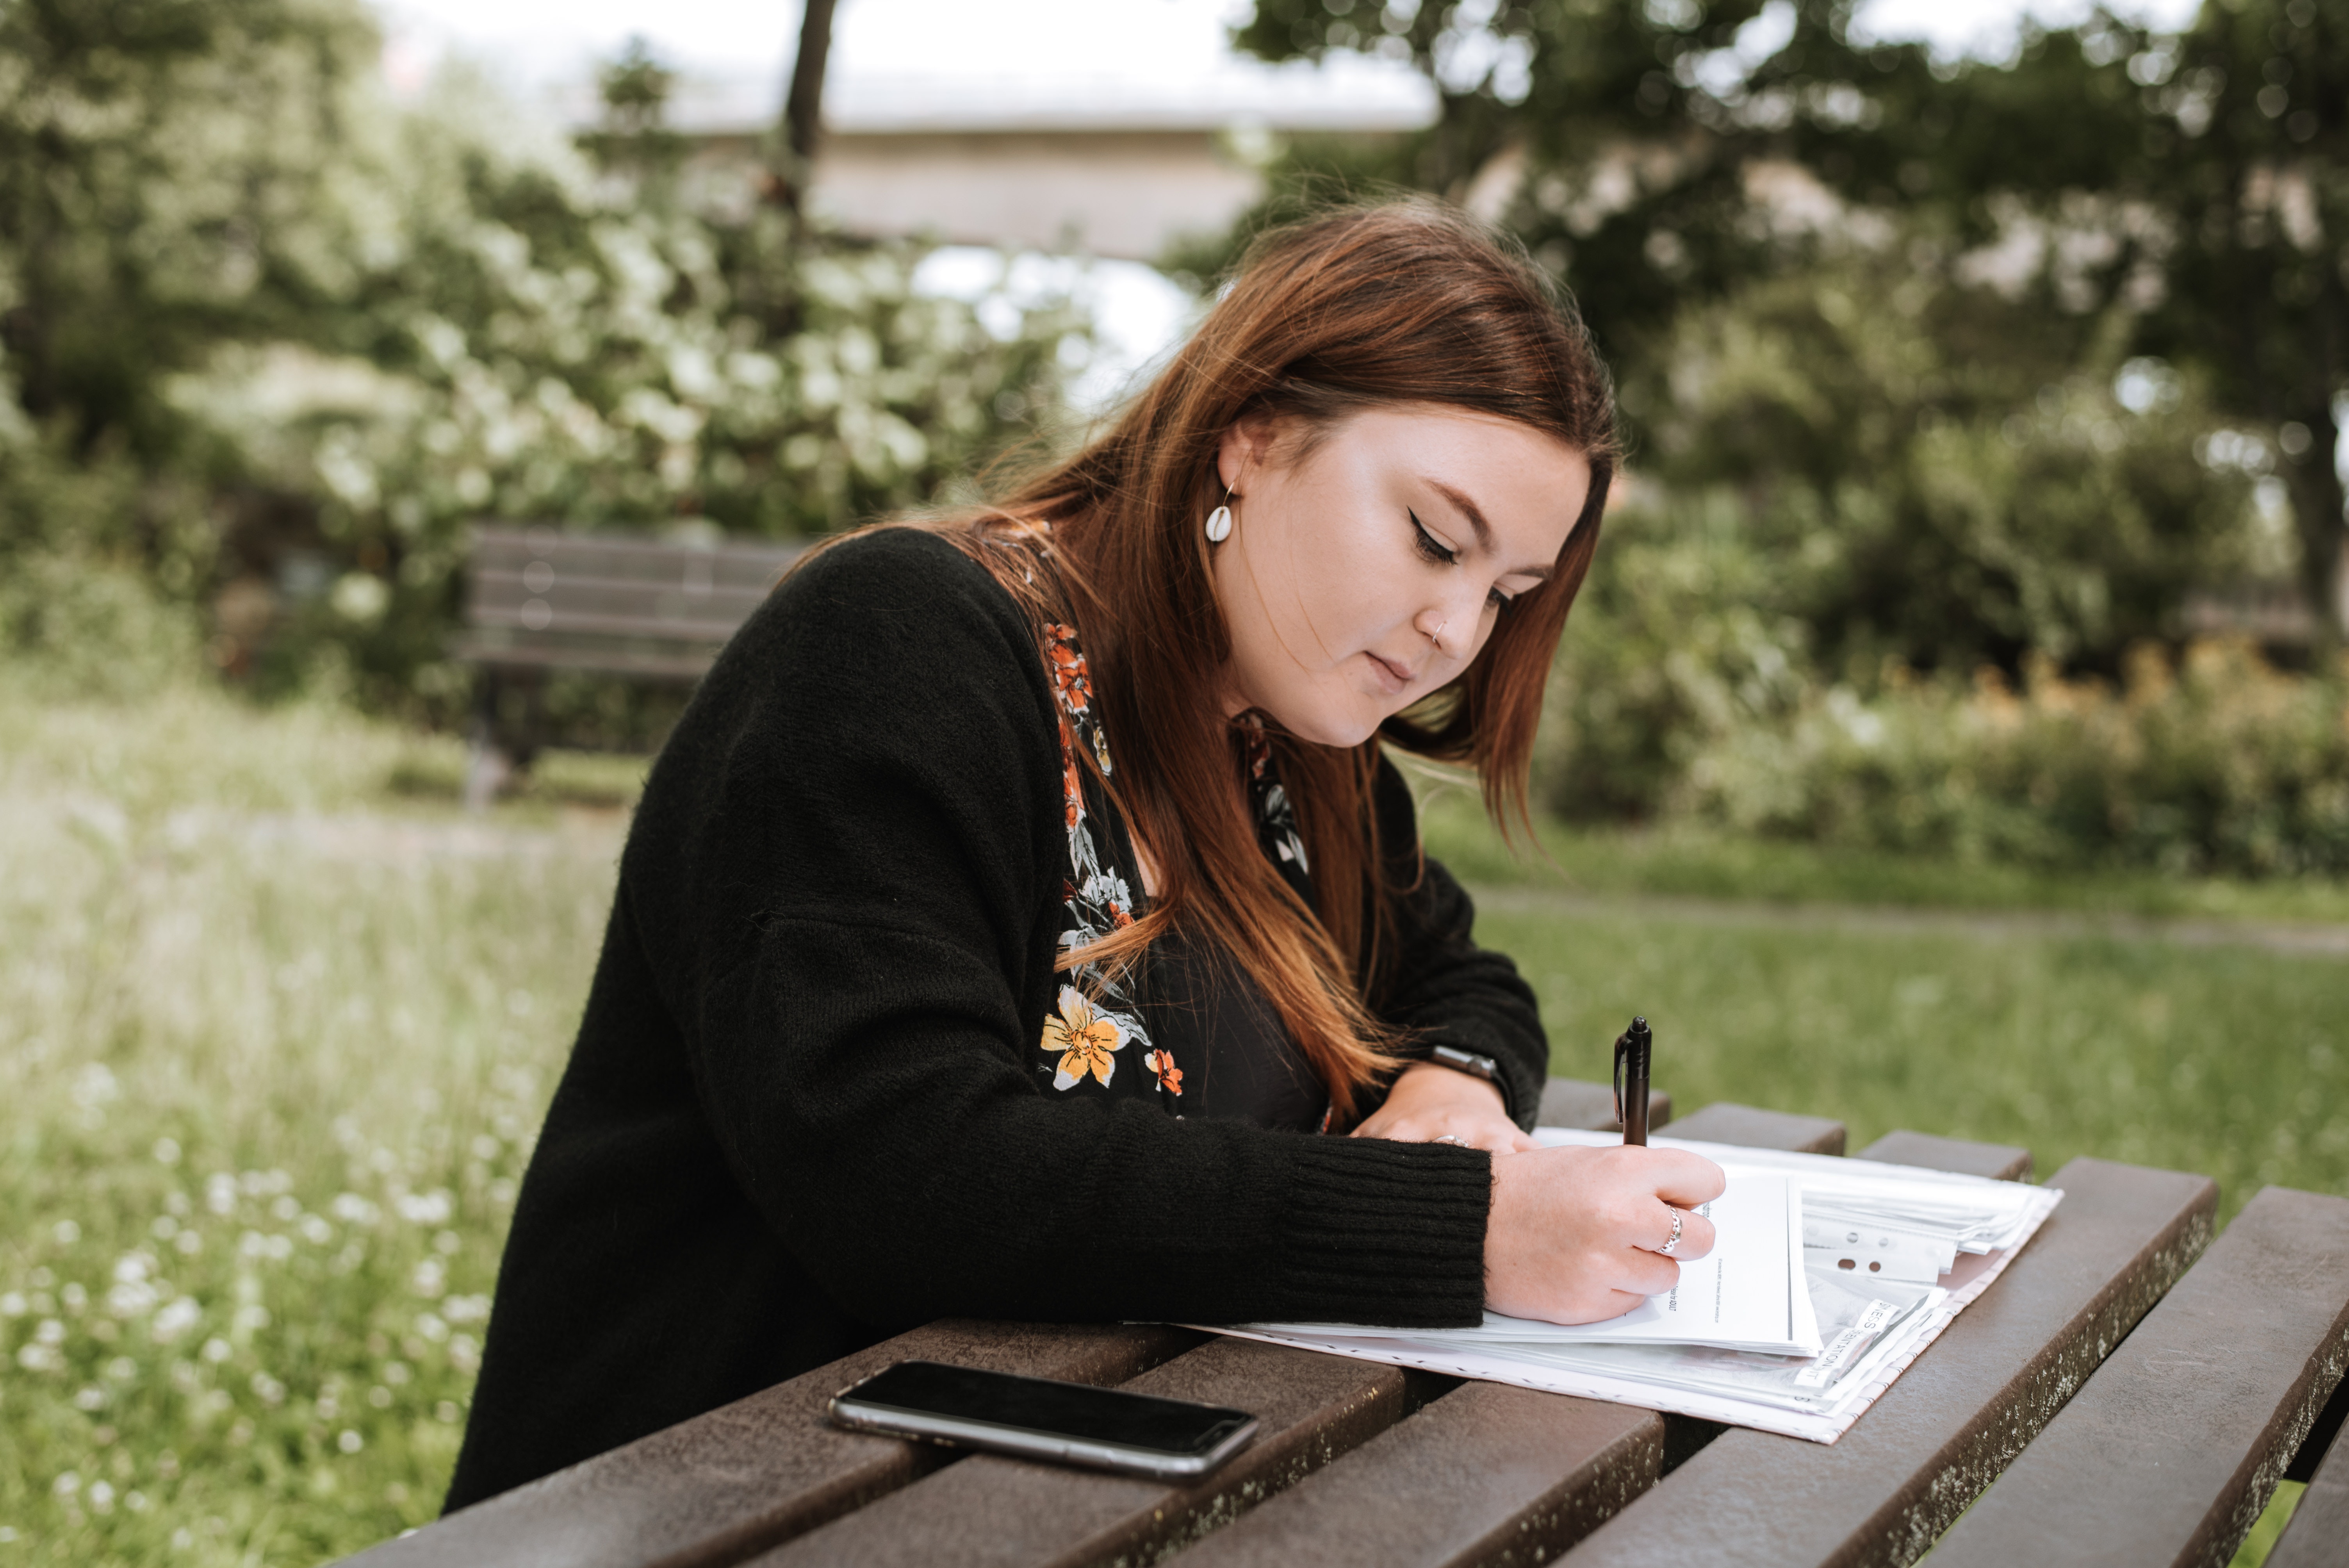 Light skinned woman with long brown hair sits at a picknick bench and writes on papers with a cell phone next to her and a park in the background